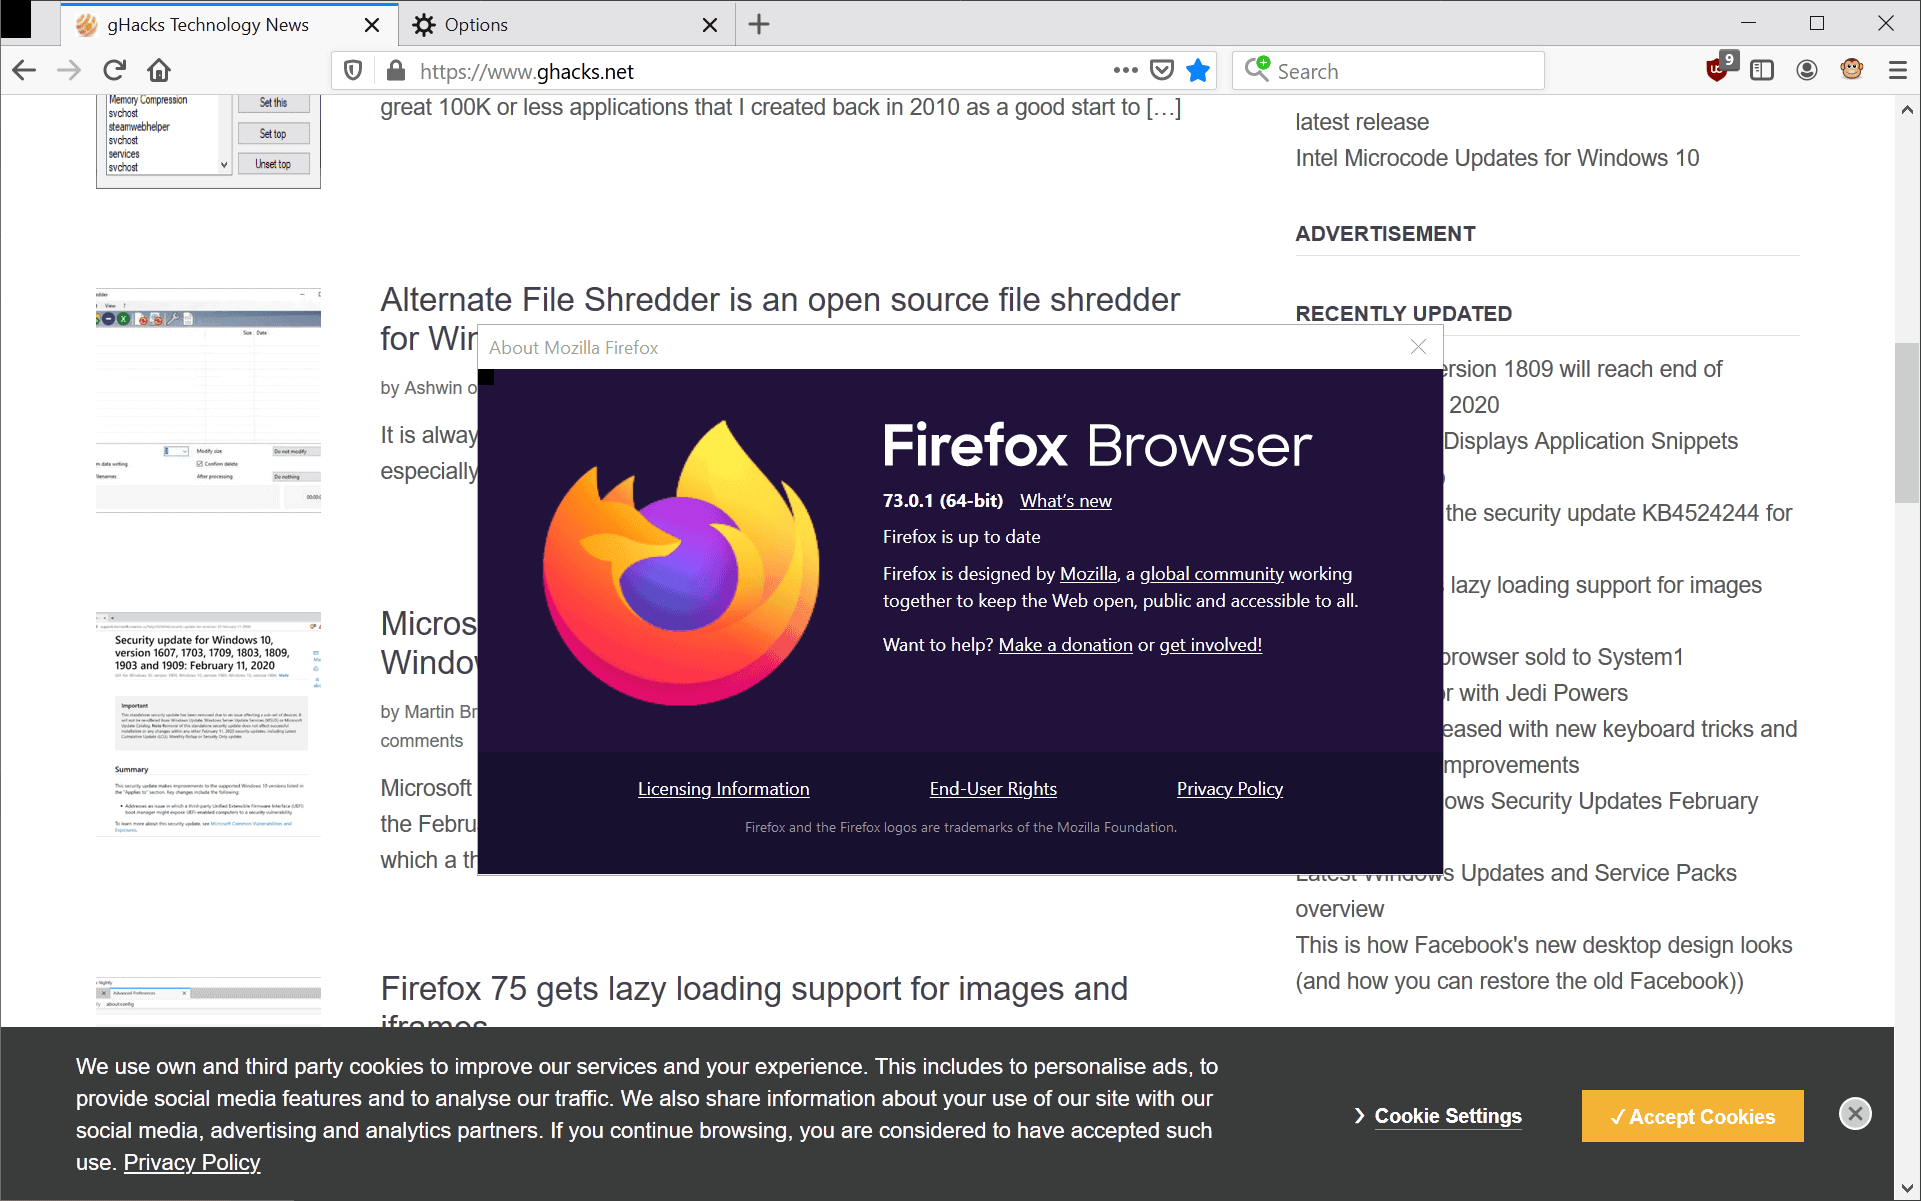 Firefox 73.0.1 will be released later today